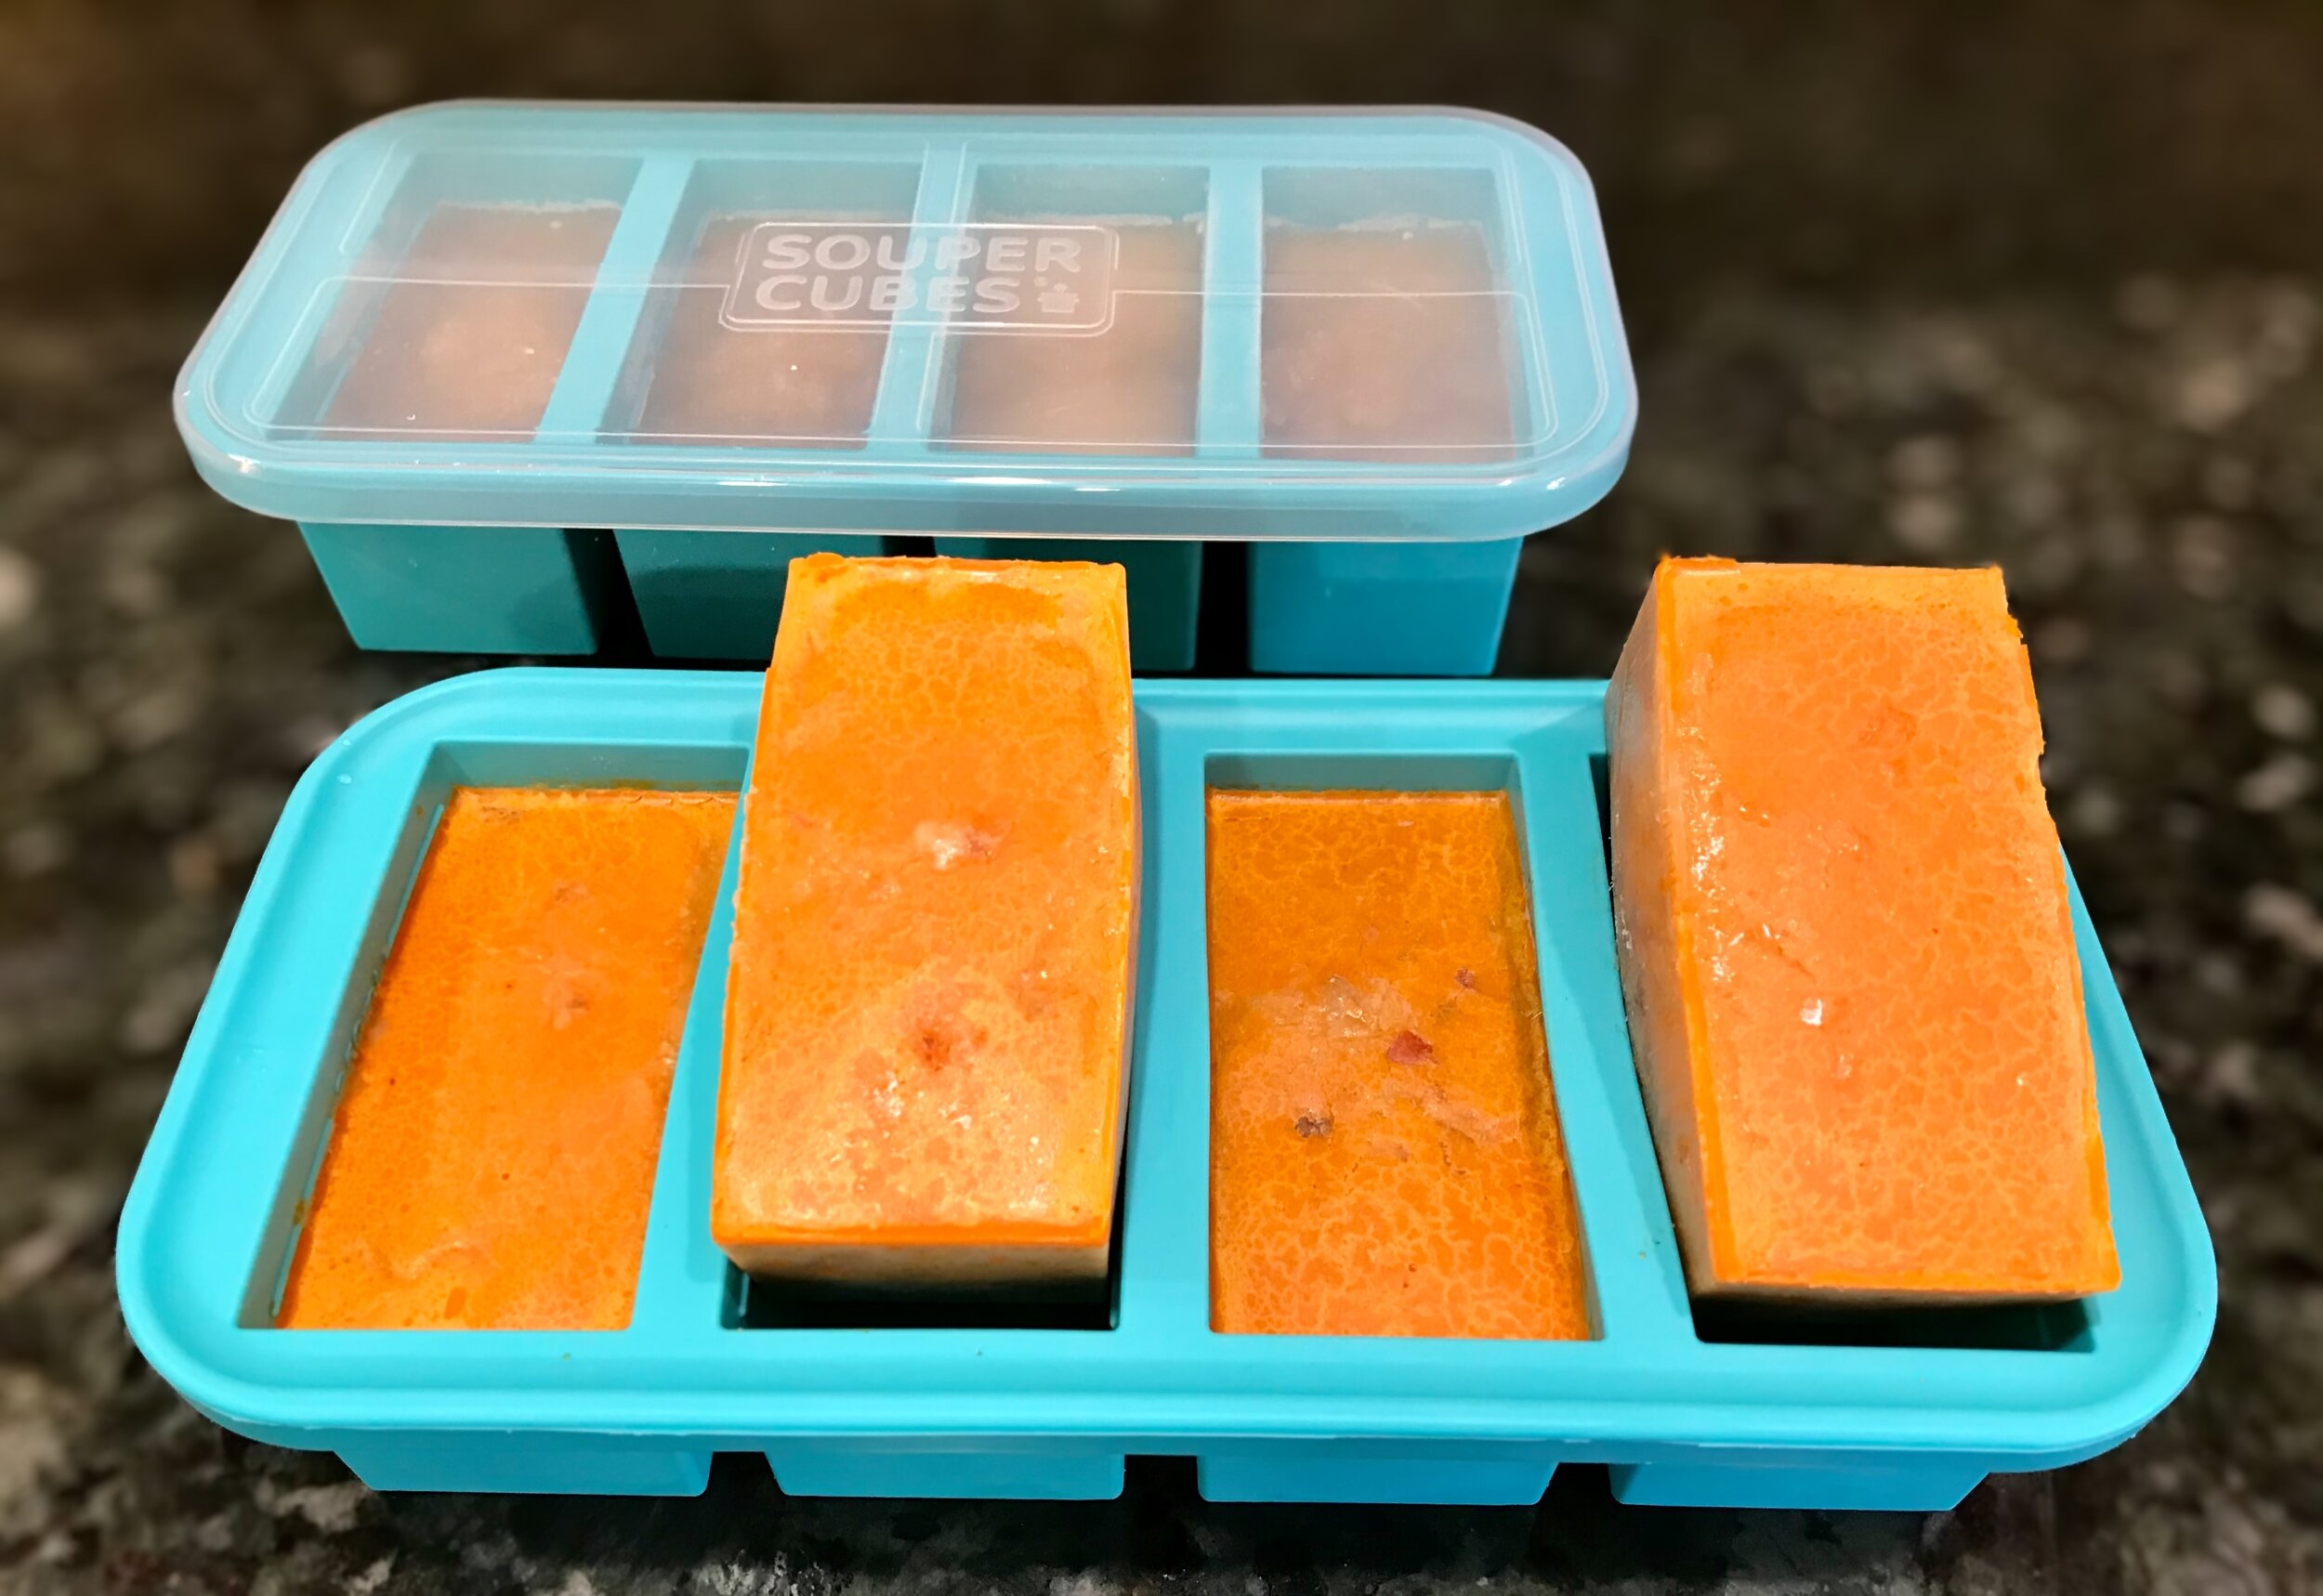 Souper Cubes Review - Best Way to Freeze Food